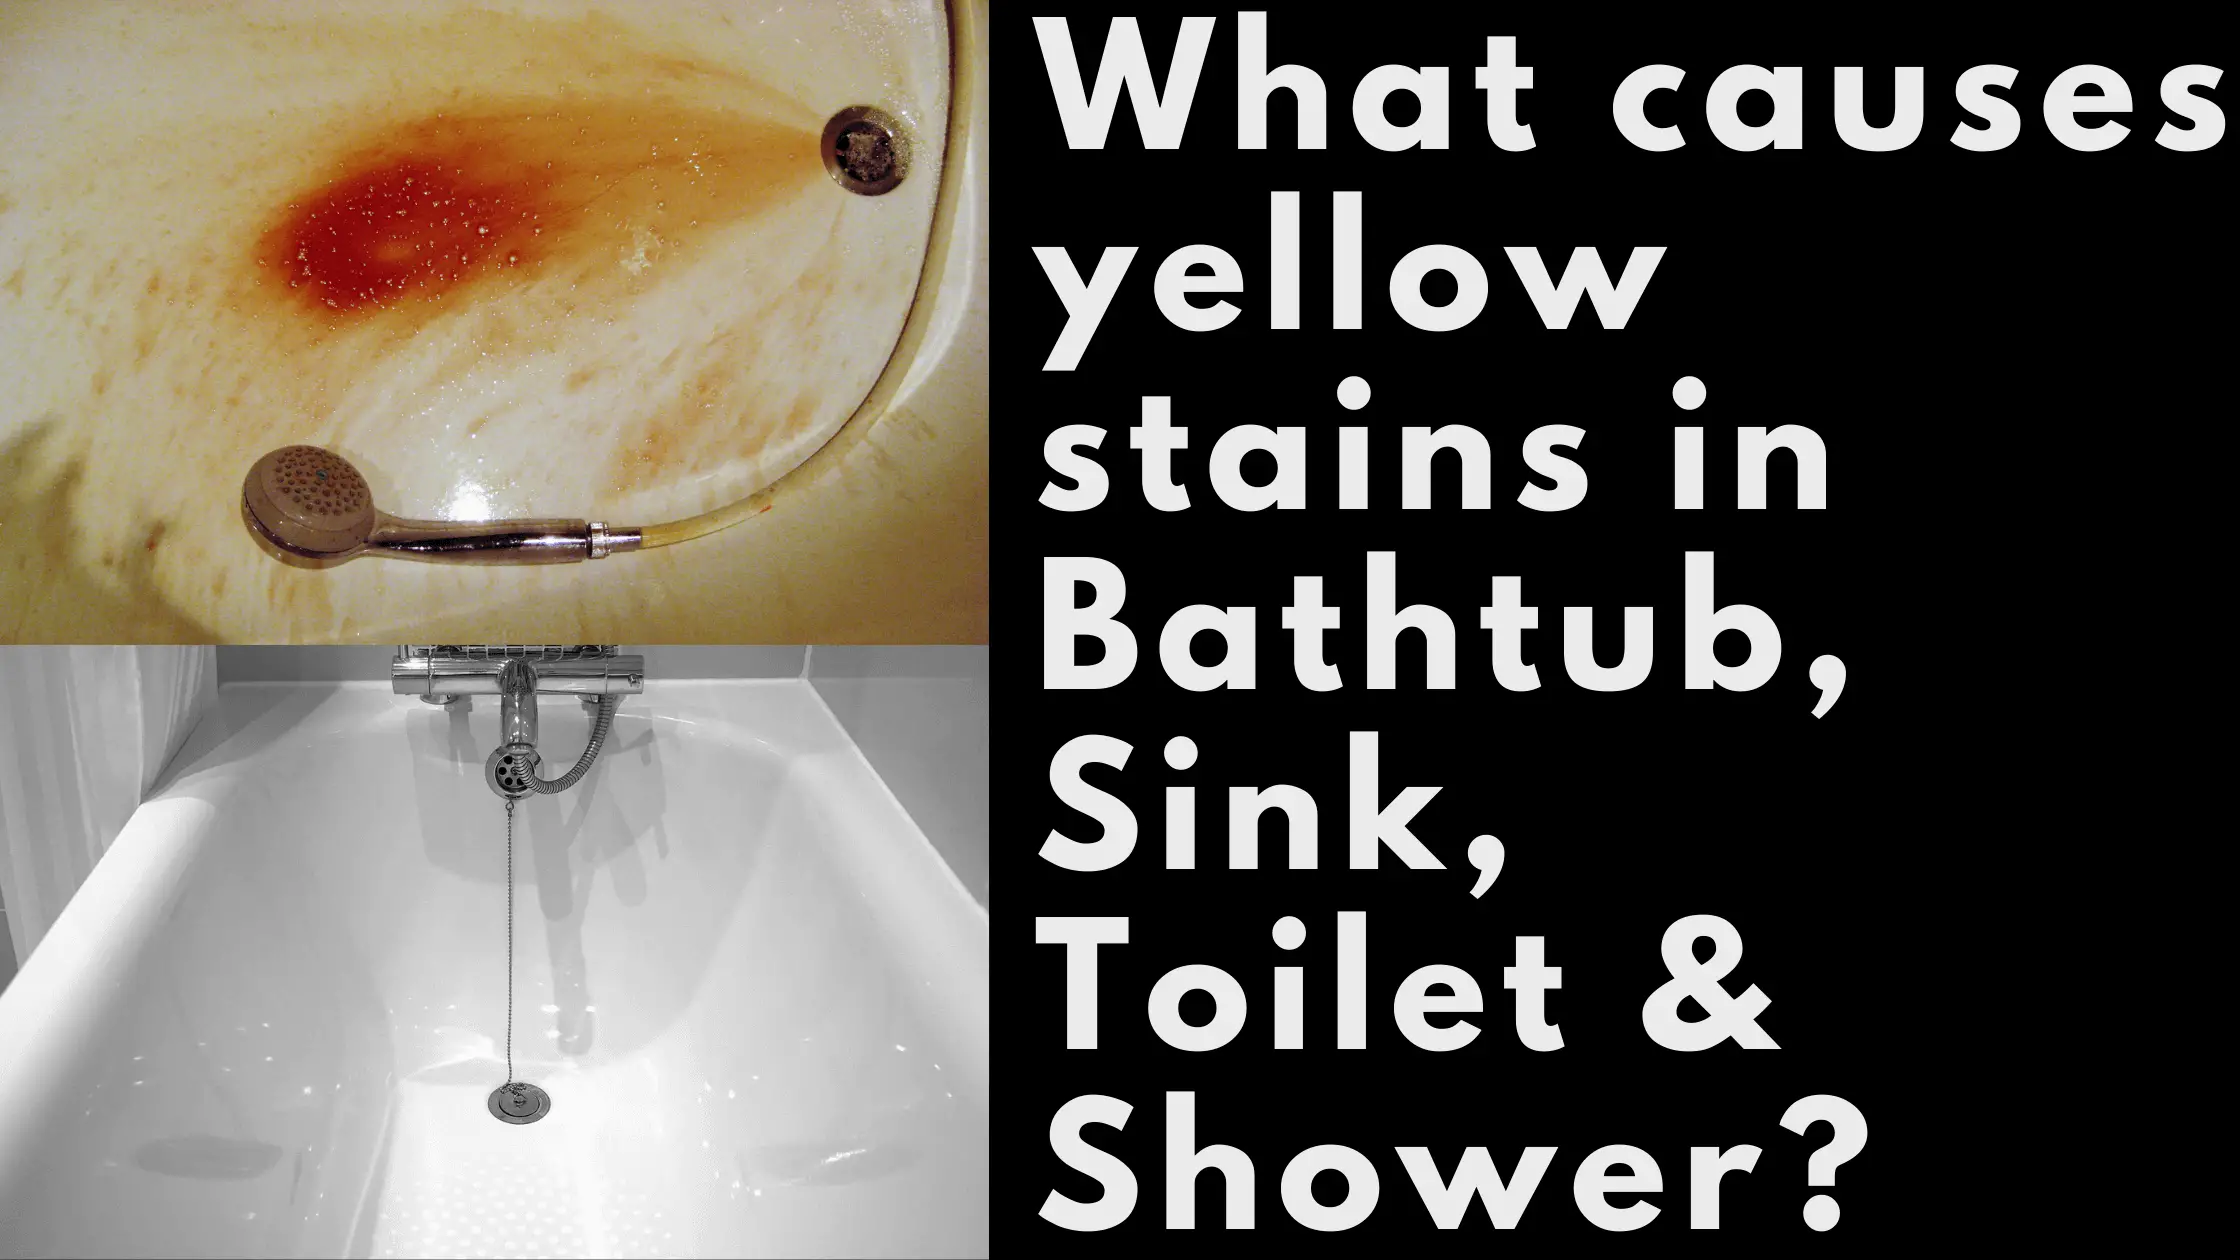 Yellow Stains In Bathtub Sink Toilet, Home Remedies For Bathtub Stains